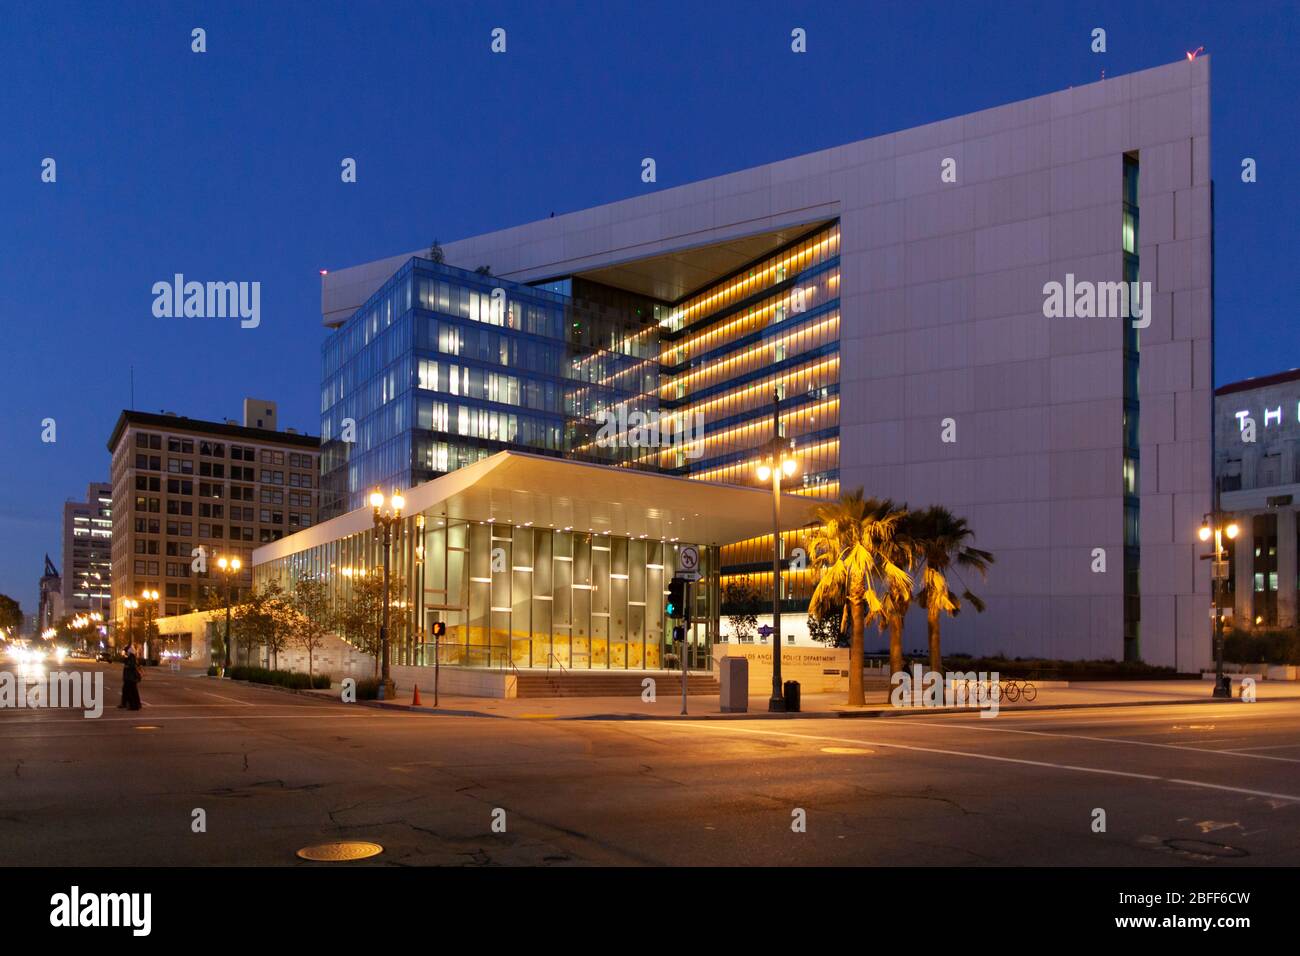 LAPD, Los Angeles Police Department new headquarters administration building in downtown at dusk Stock Photo